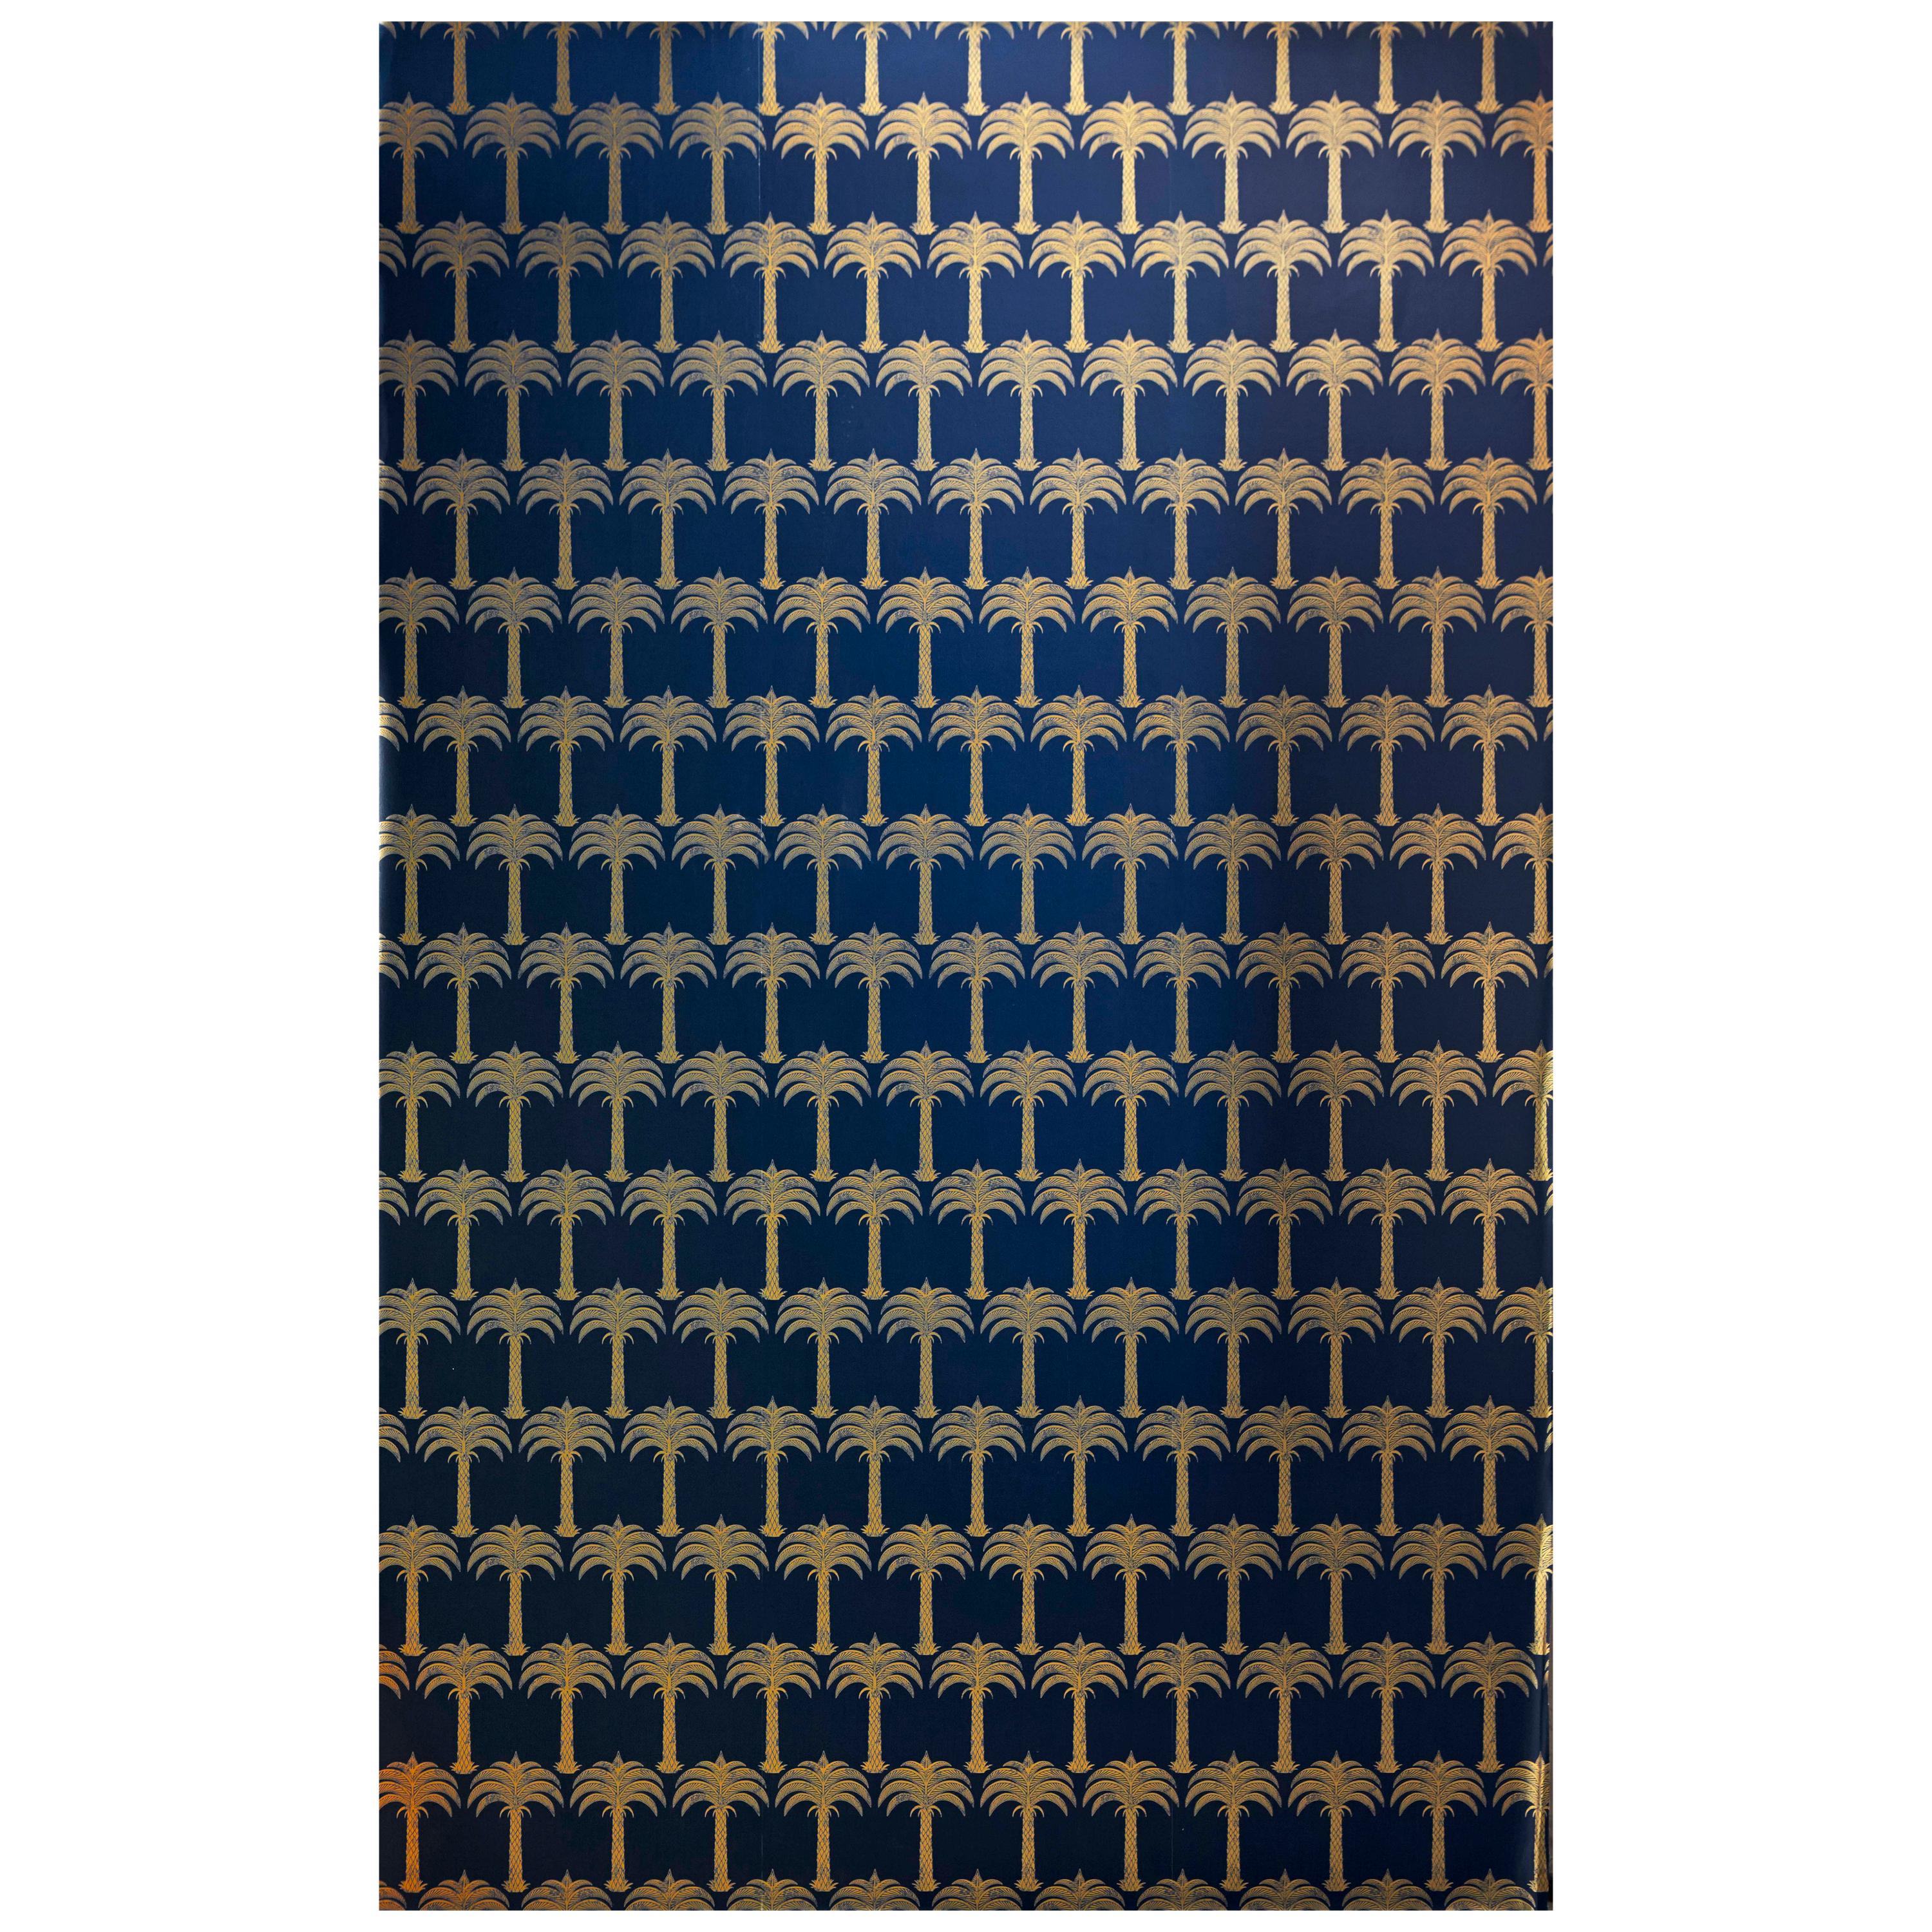 'Marrakech Palm' Contemporary, Traditional Wallpaper in Midnight Blue im Angebot